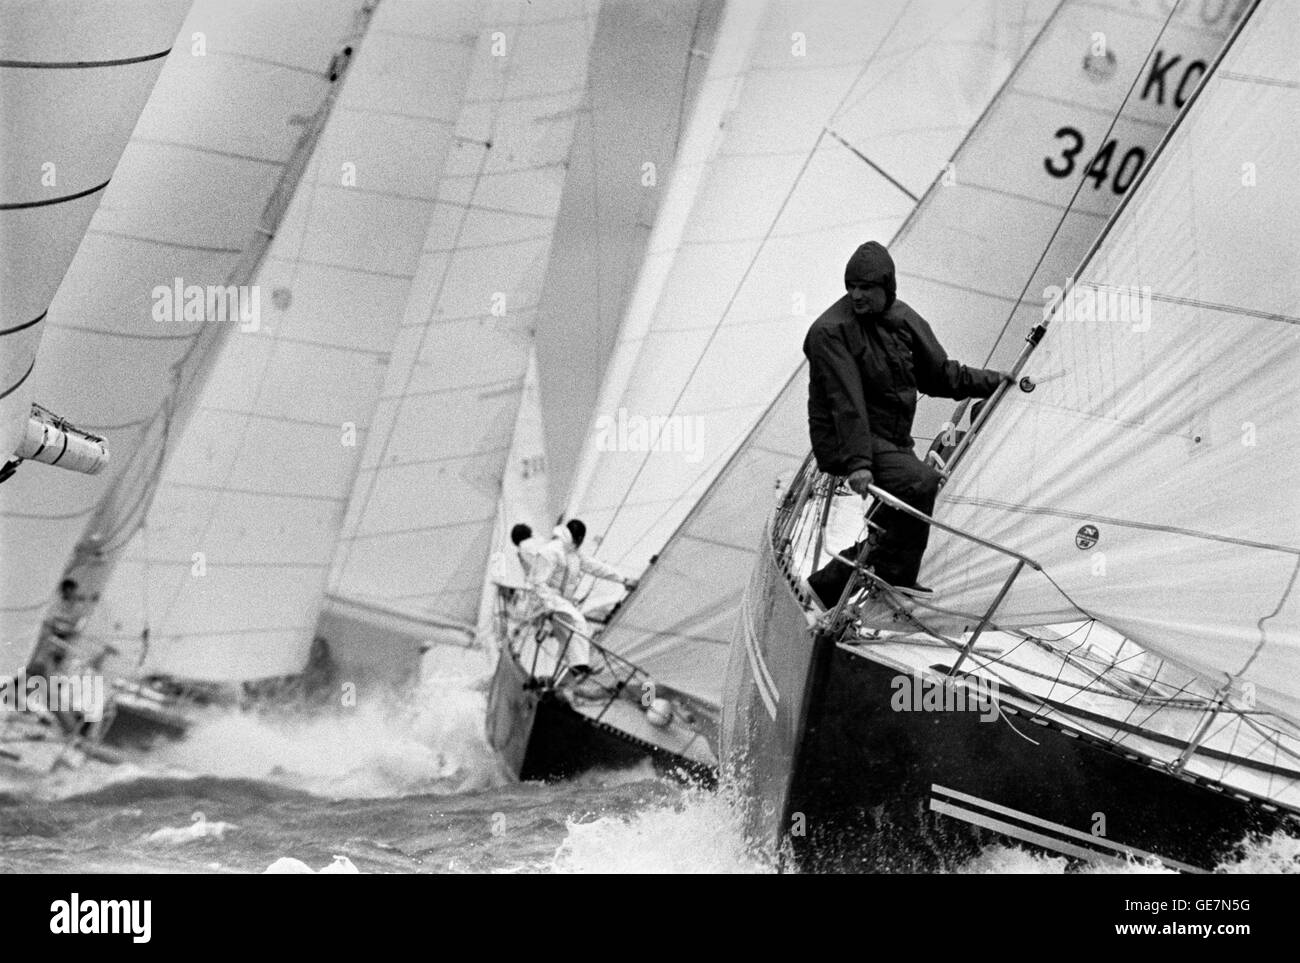 AJAXNETPHOTO. 1979. COWES, ENGLAND. - ADMIRAL'S CUP - FLEET START OF THE FIRST INSHORE RACE ON THE ROYAL YACHT SQUADRON LINE IN WINDY CONDITIONS. PHOTO:JONATHAN EASTLAND/AJAX  REF:()YAR ADC START RYS 1979 Stock Photo